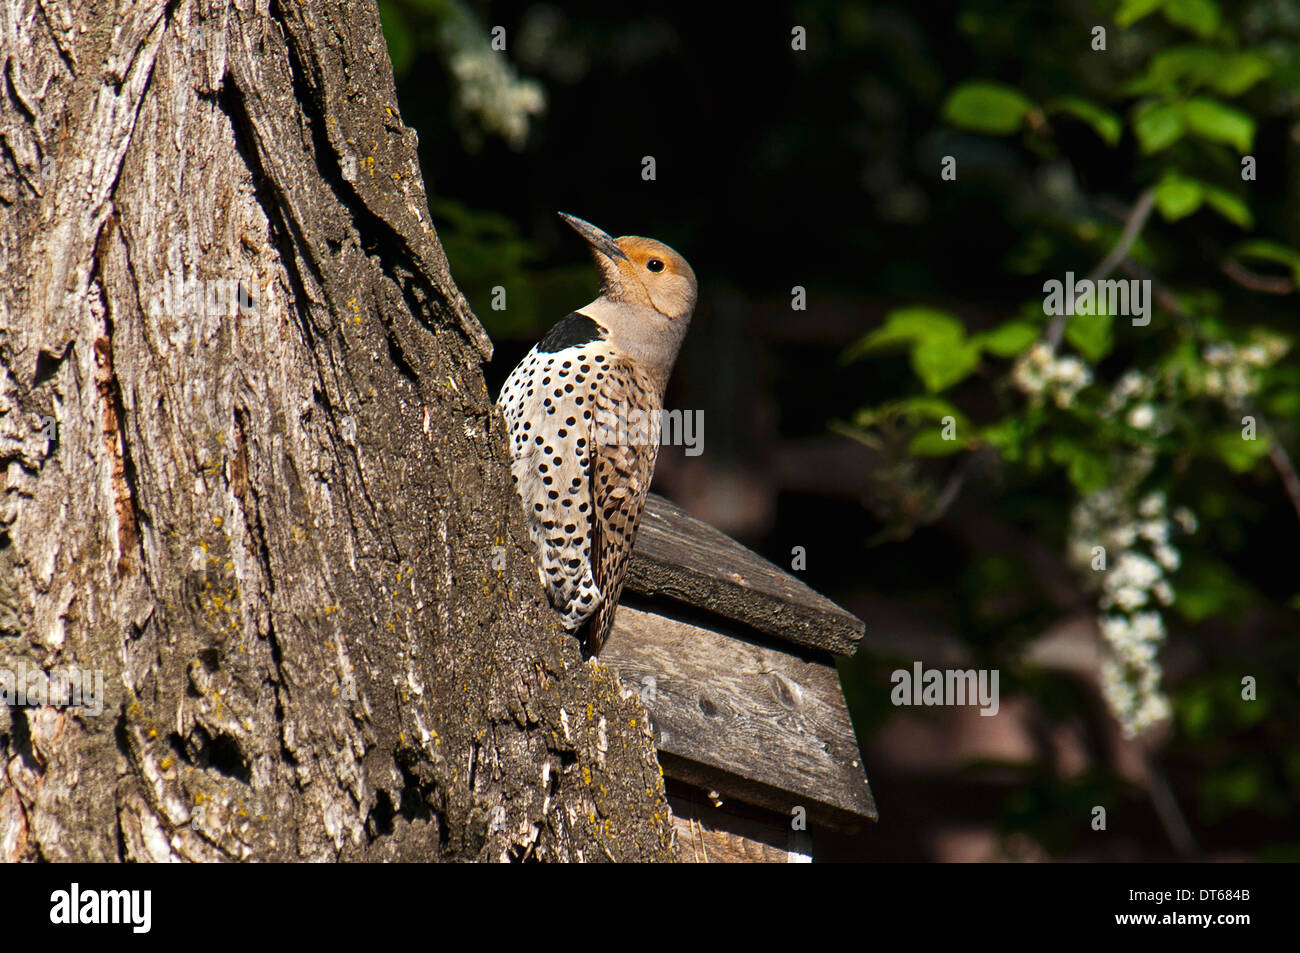 Canada, Alberta, Lethbridge, Northern Flicker, Colaptes auratus, woodpecker with catchlight in eye on old gnarled Elm tree. Stock Photo